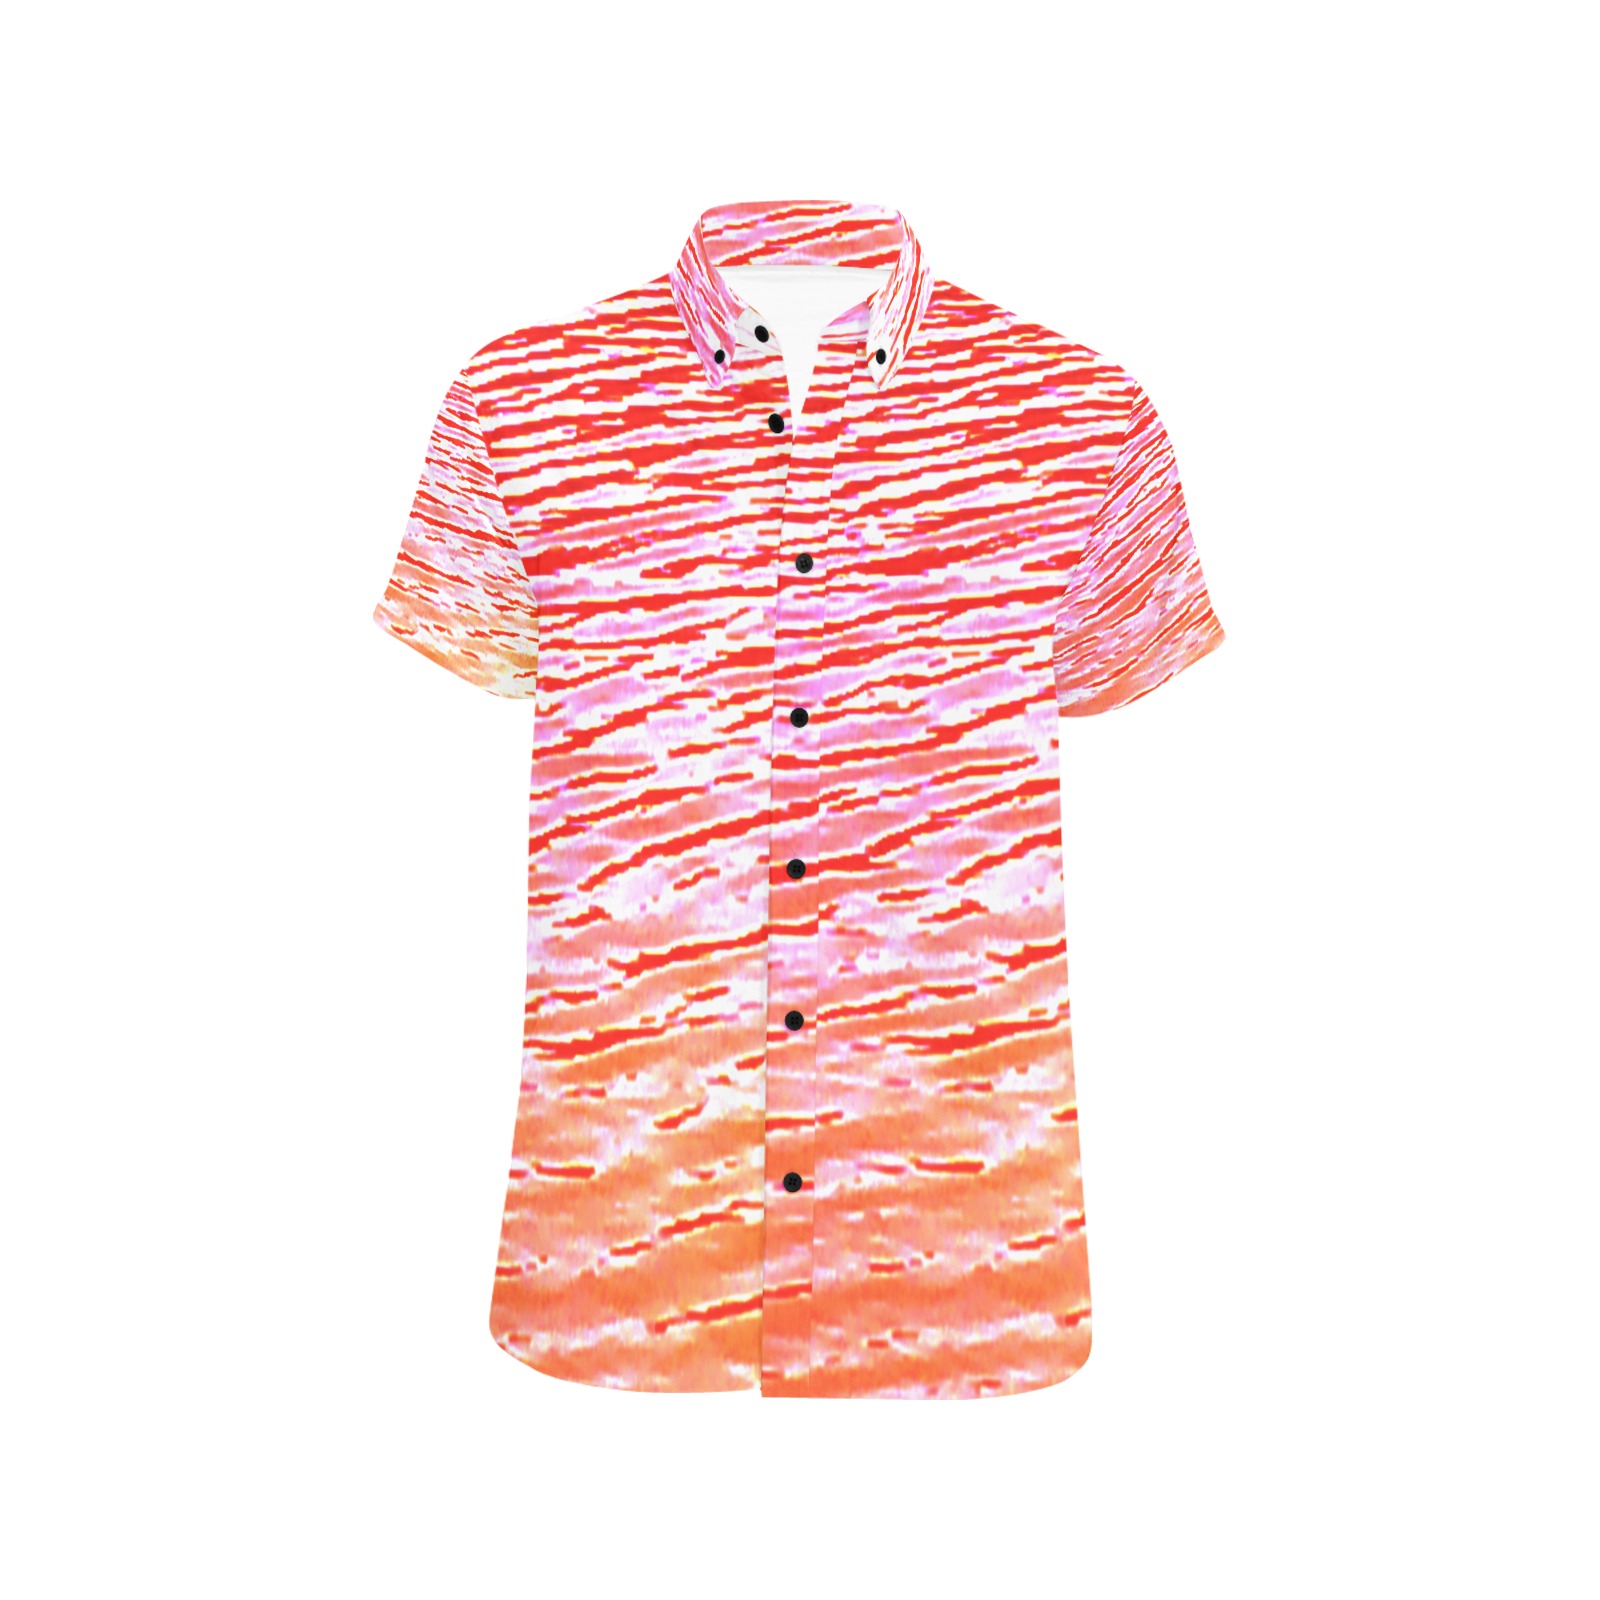 Orange and red water Men's All Over Print Short Sleeve Shirt (Model T53)